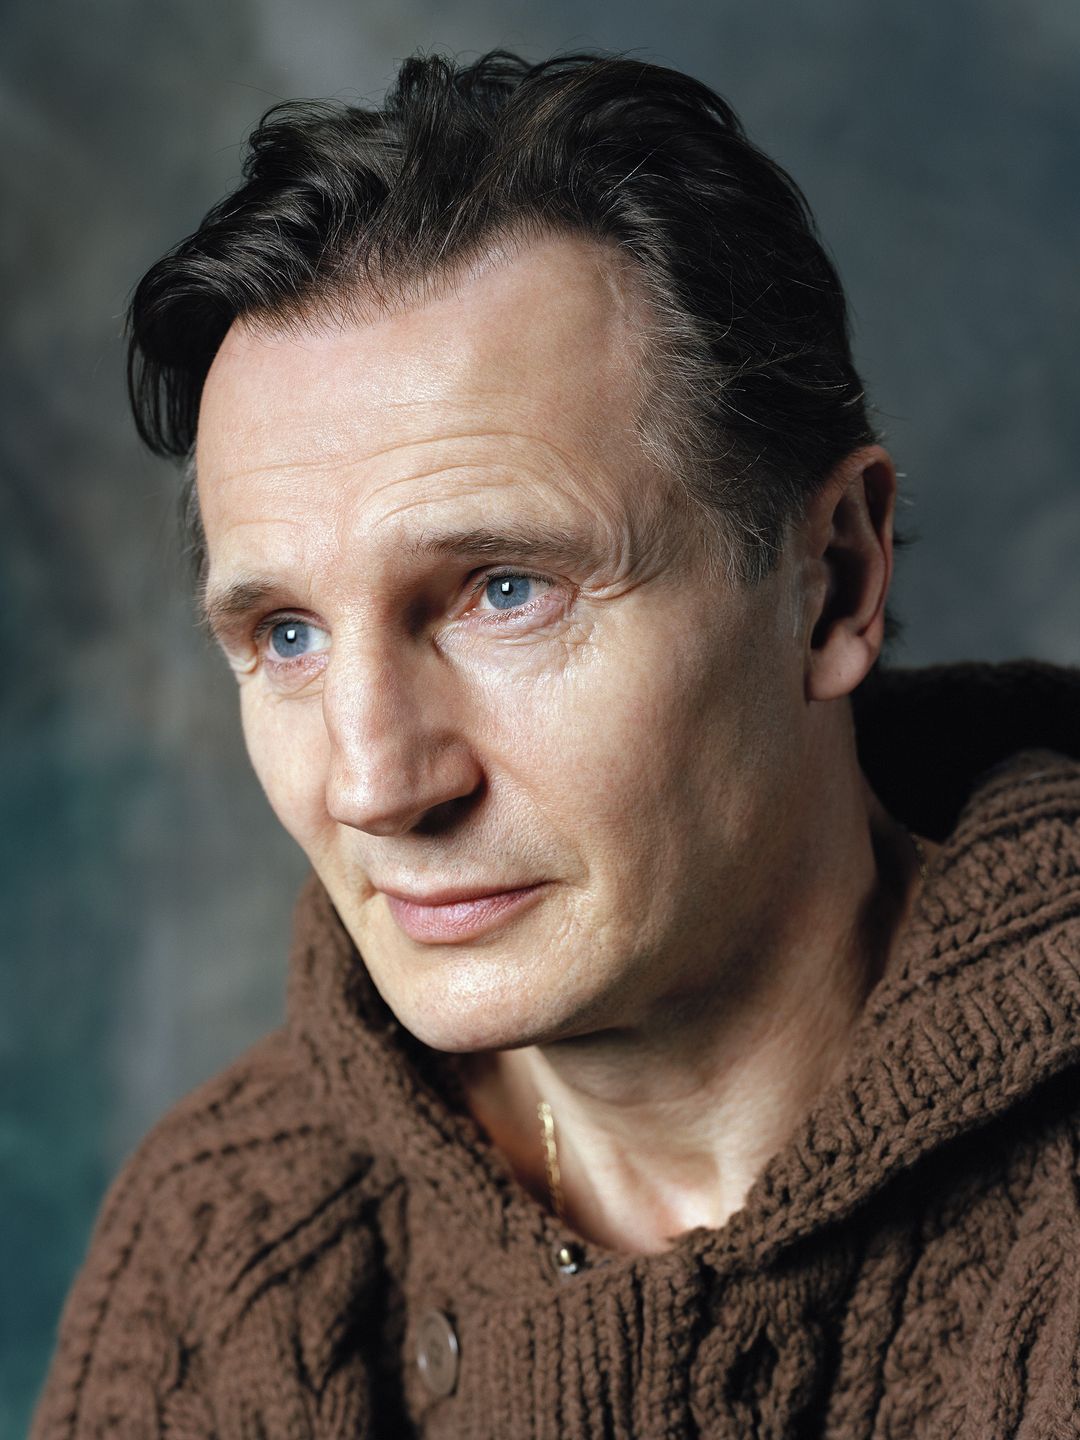 Liam Neeson in his teens